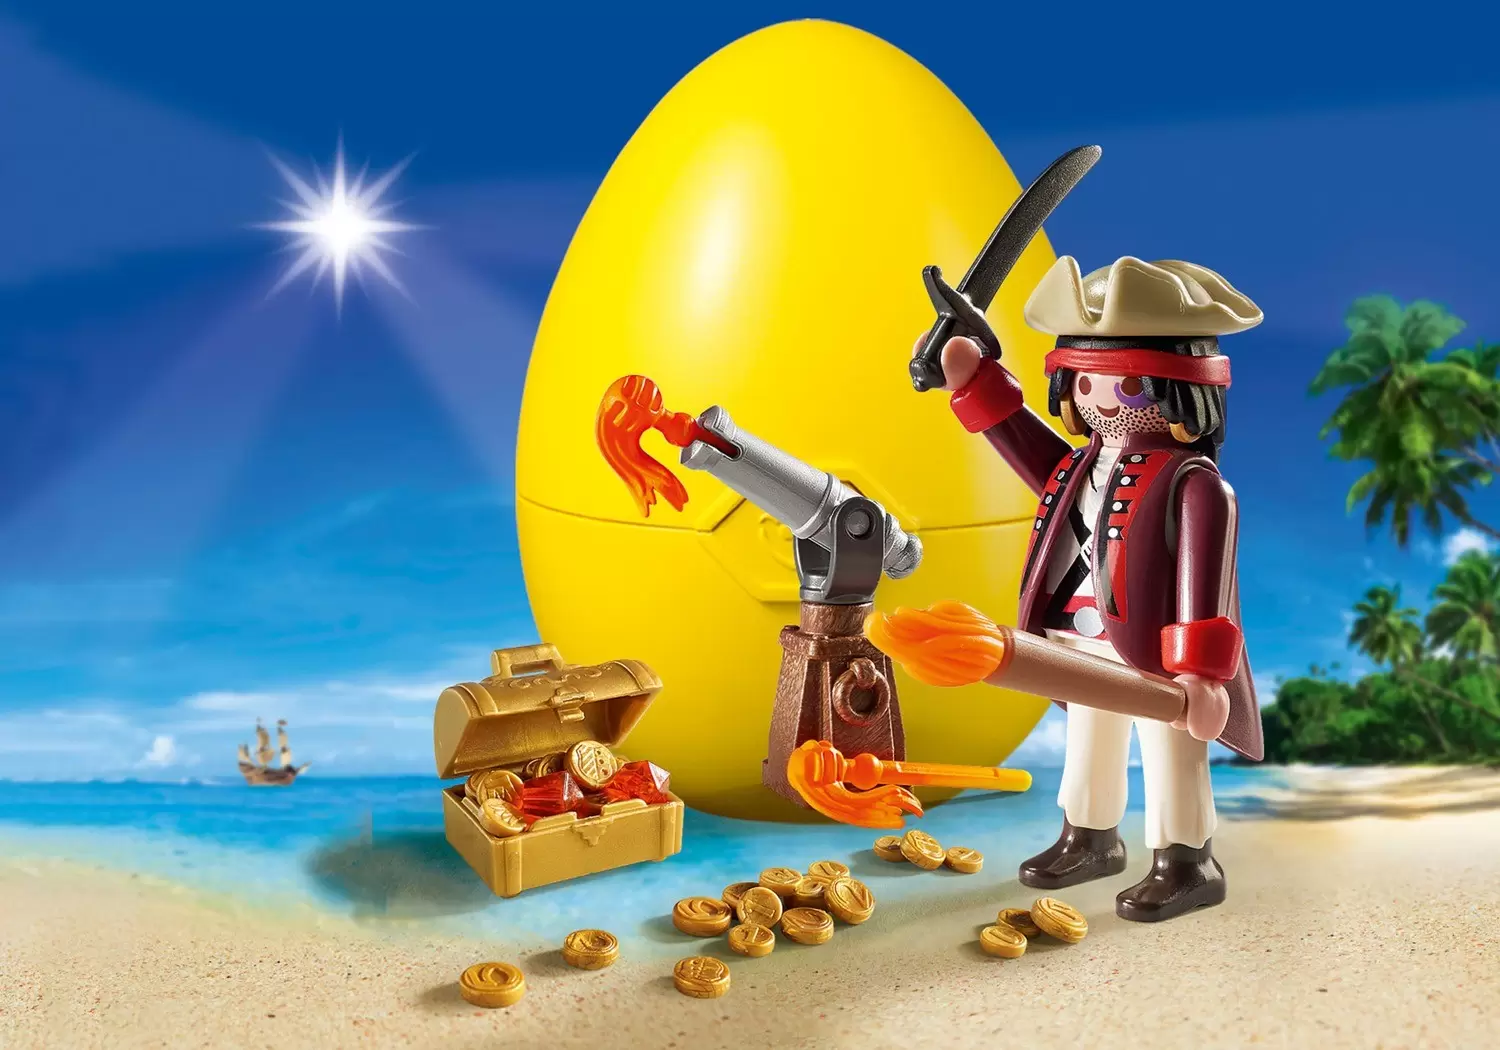 Pirate Playmobil - Pirate with Cannon